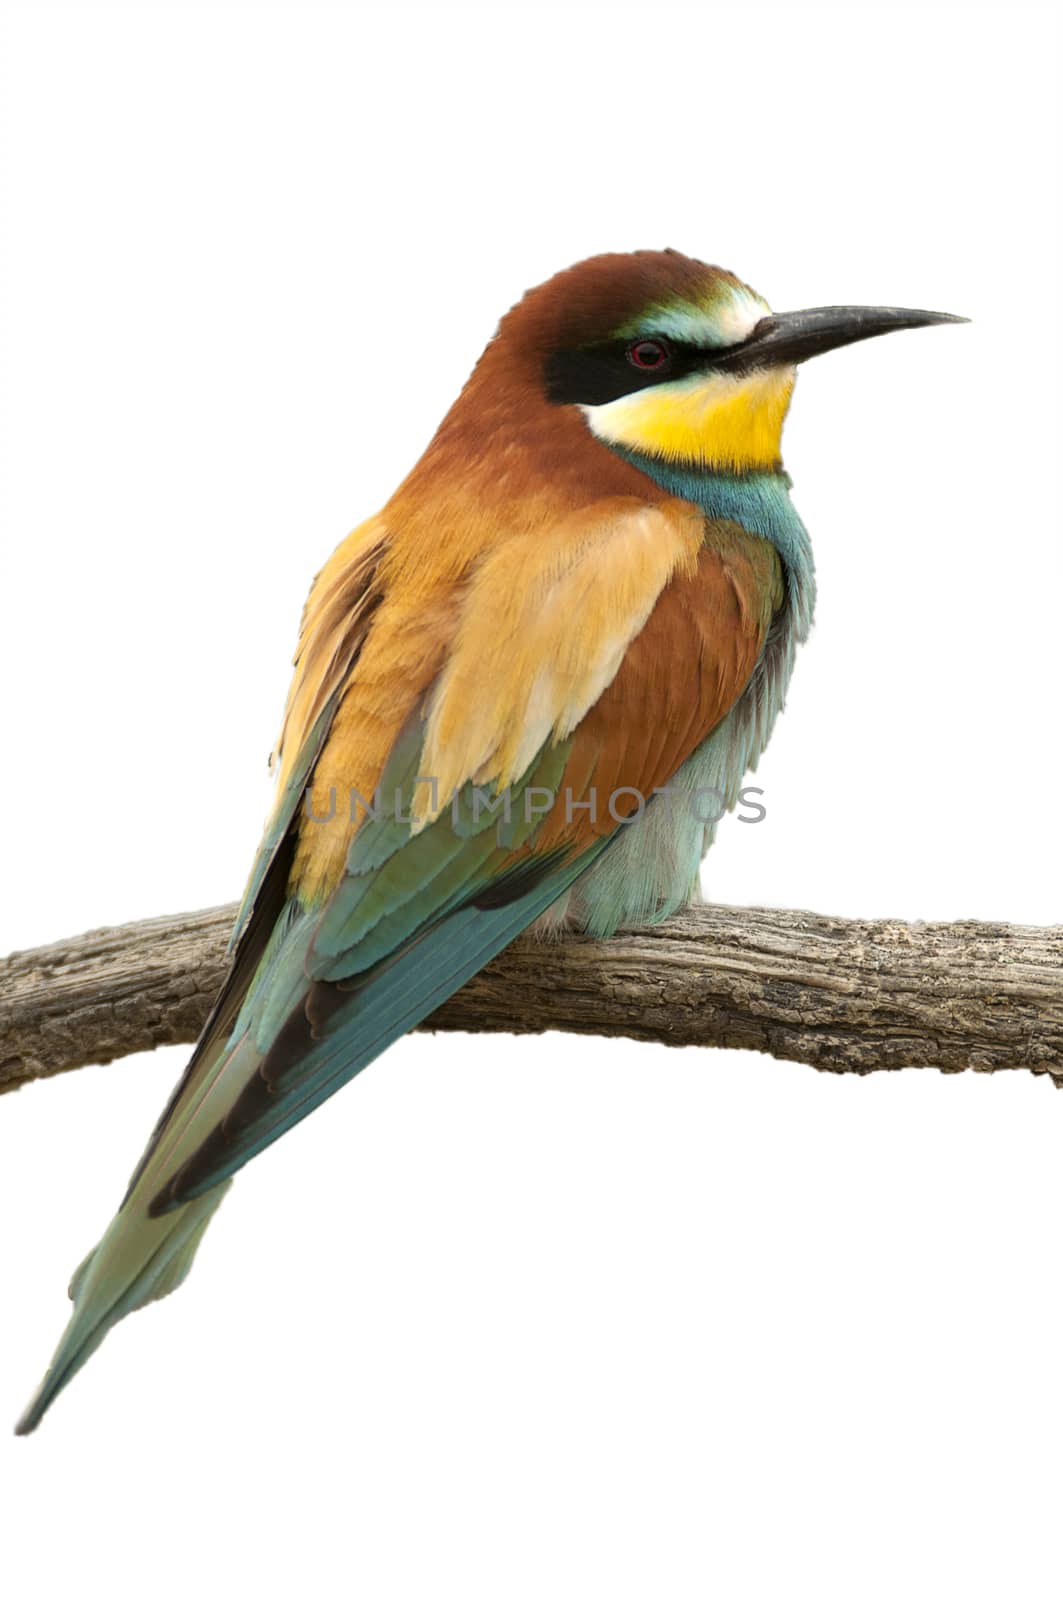 European bee-eater (Merops apiaster), Perched on a branch, with  by jalonsohu@gmail.com